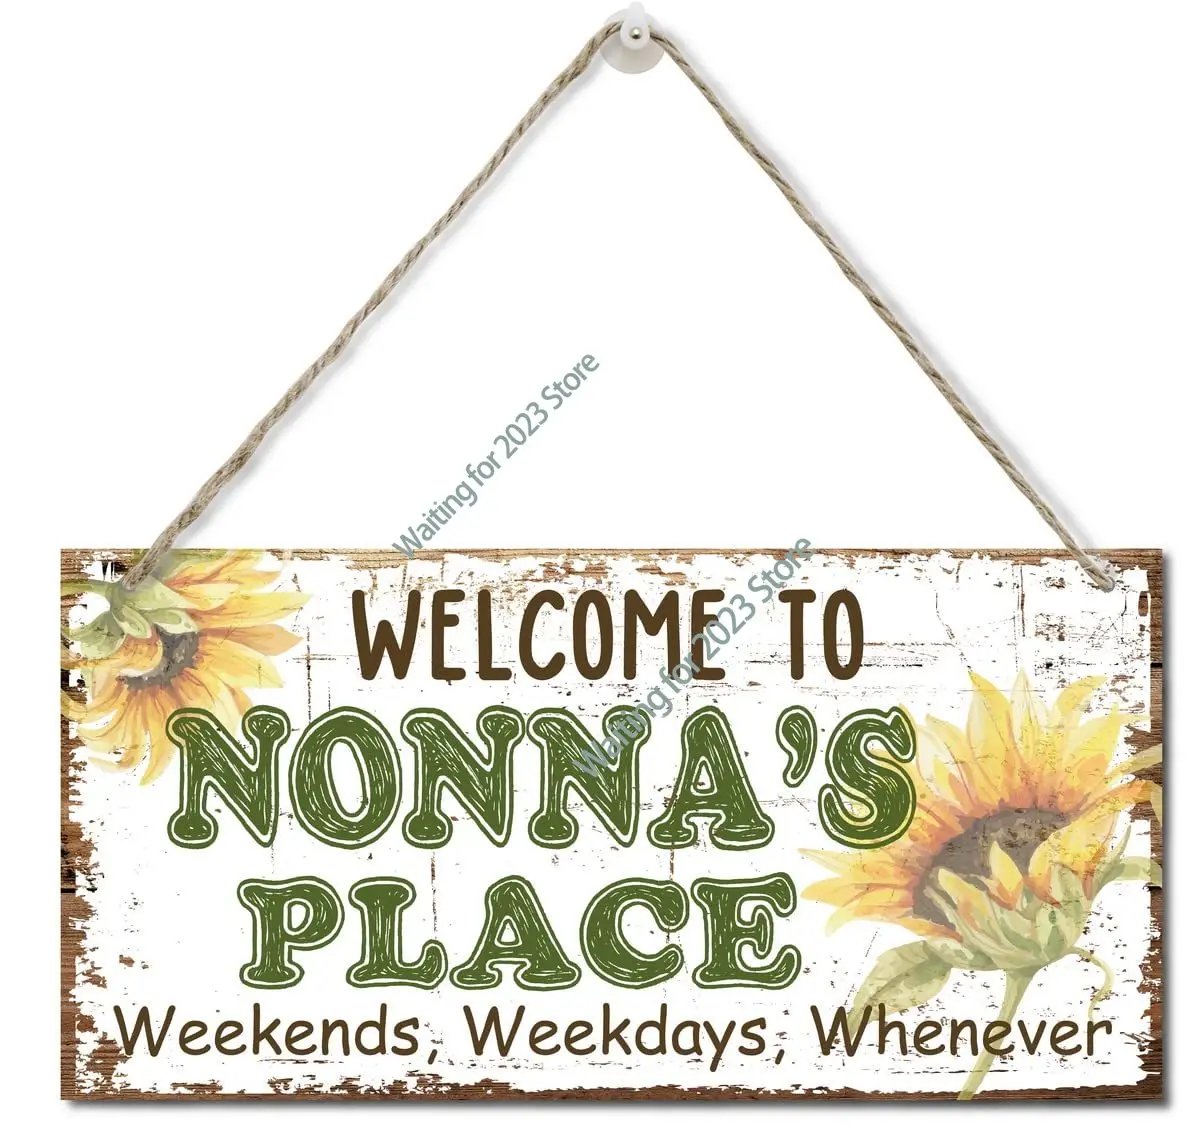 

Vintage Welcome to Nonna's Place Weekends, Weekdays, Whenever Printed Wood Plaque Hanging Wood Home Decor, Home Decor